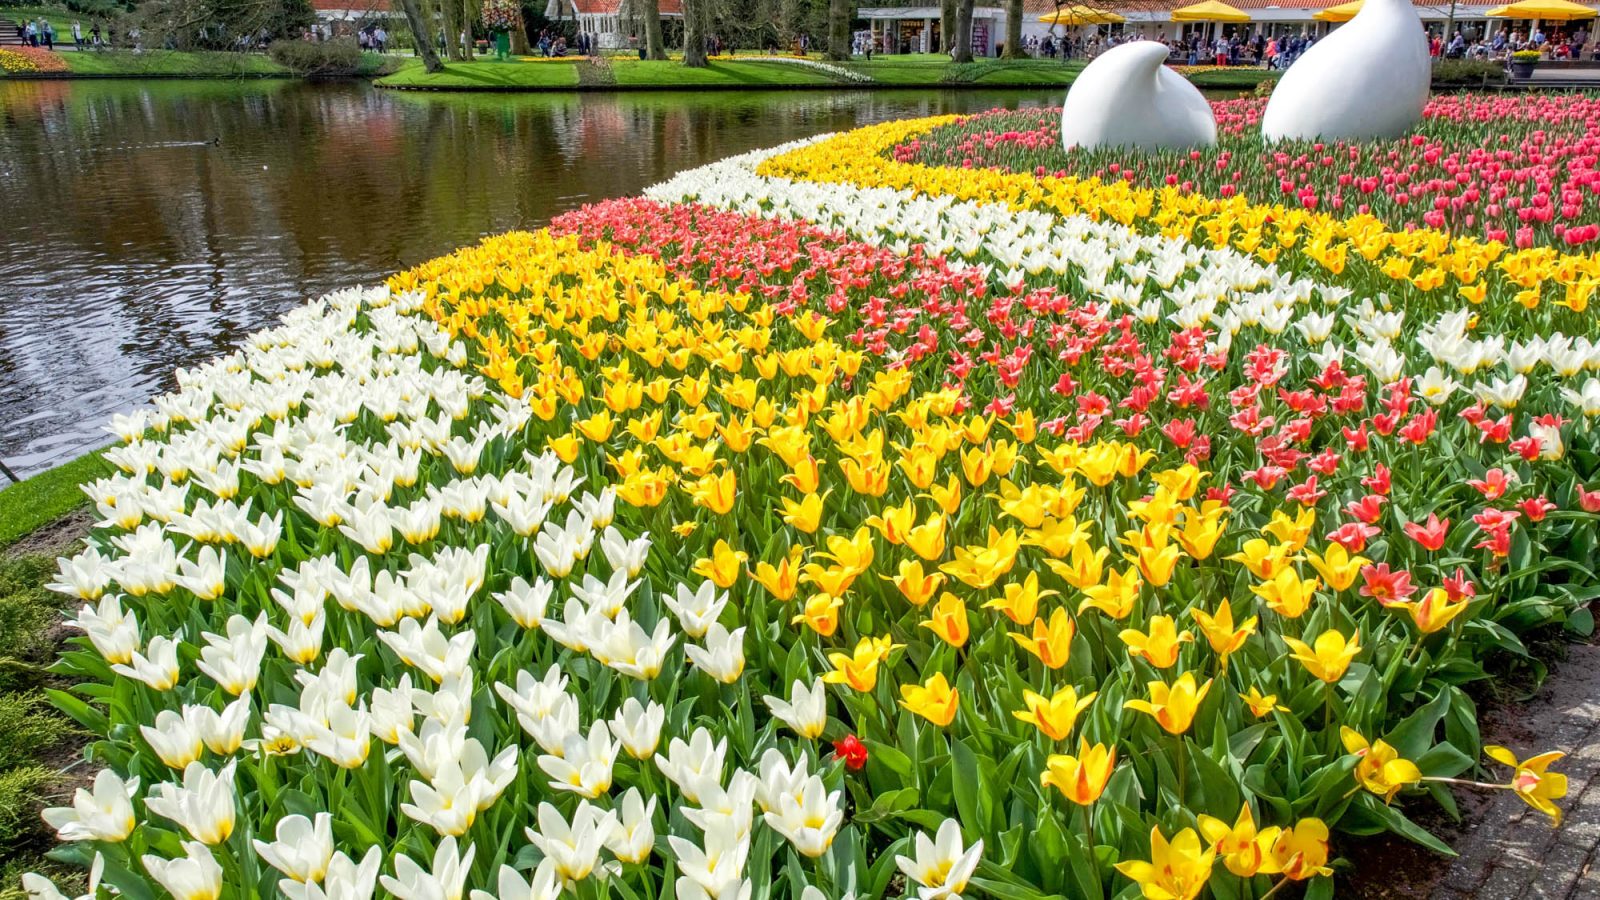 rows of yellow, white, and red flowers next to a lake